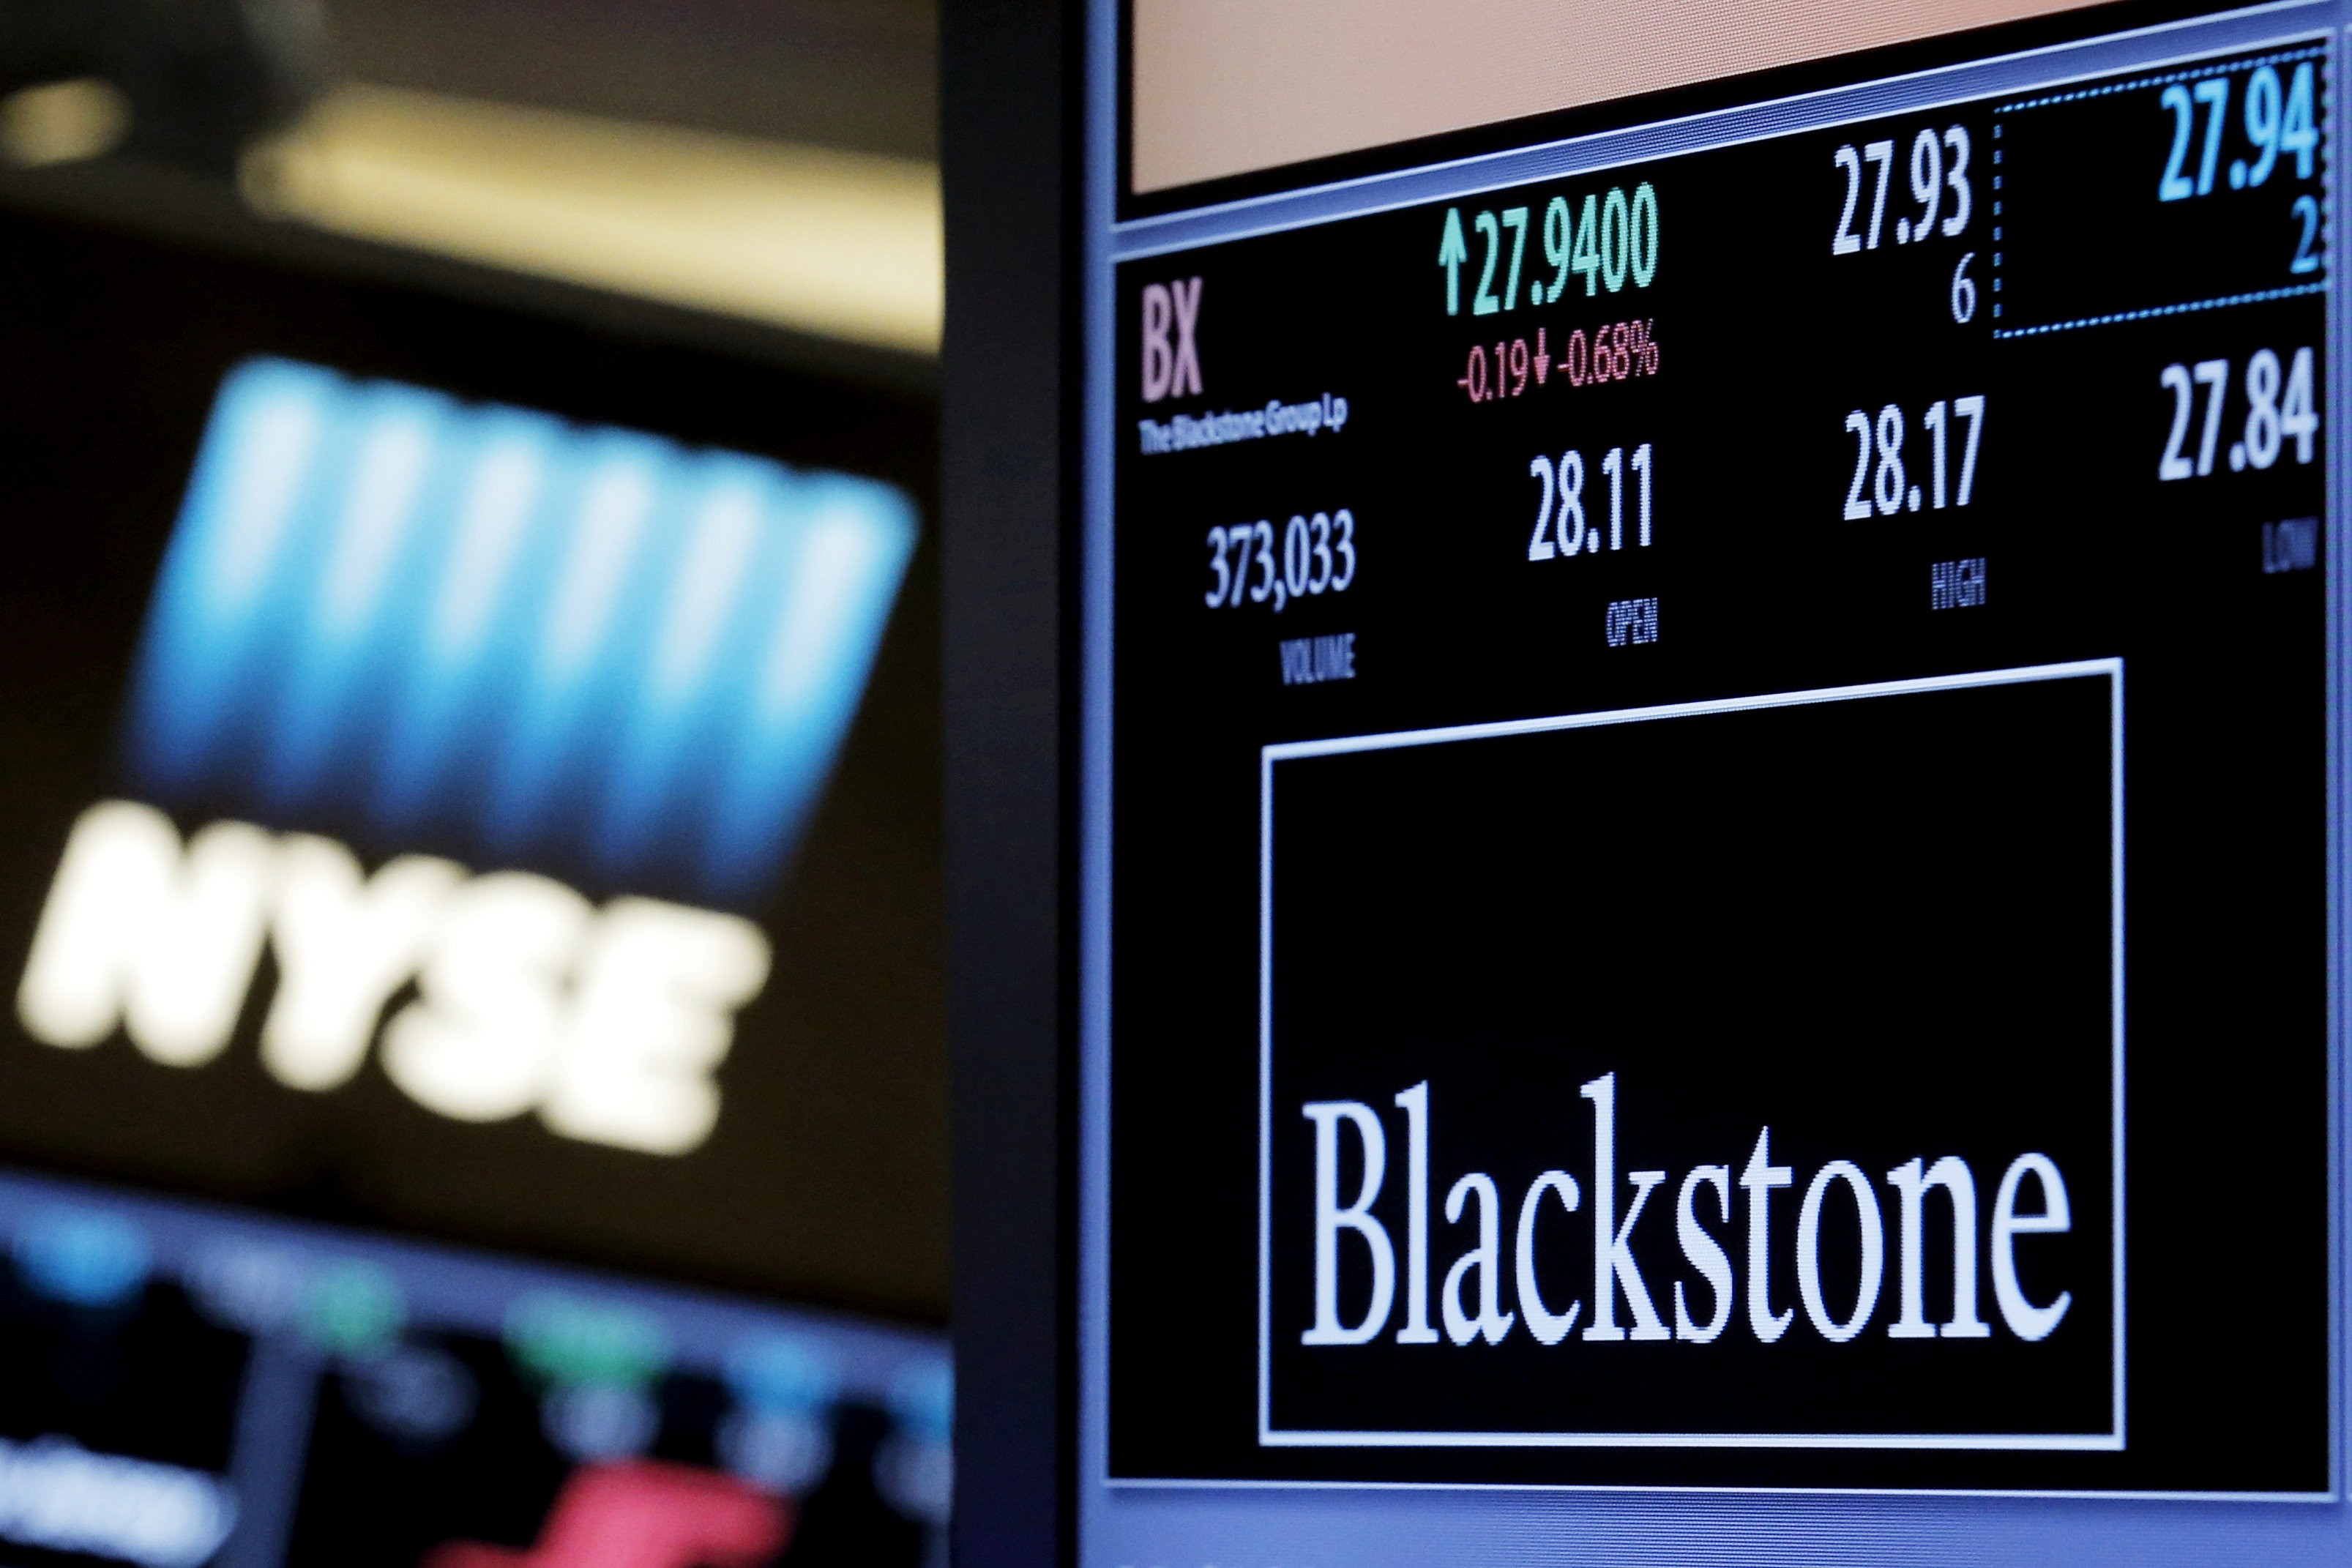 Blackstone’s Strategic Capital Holdings Fund has about US$75 billion in assets under management. Photo: Reuters